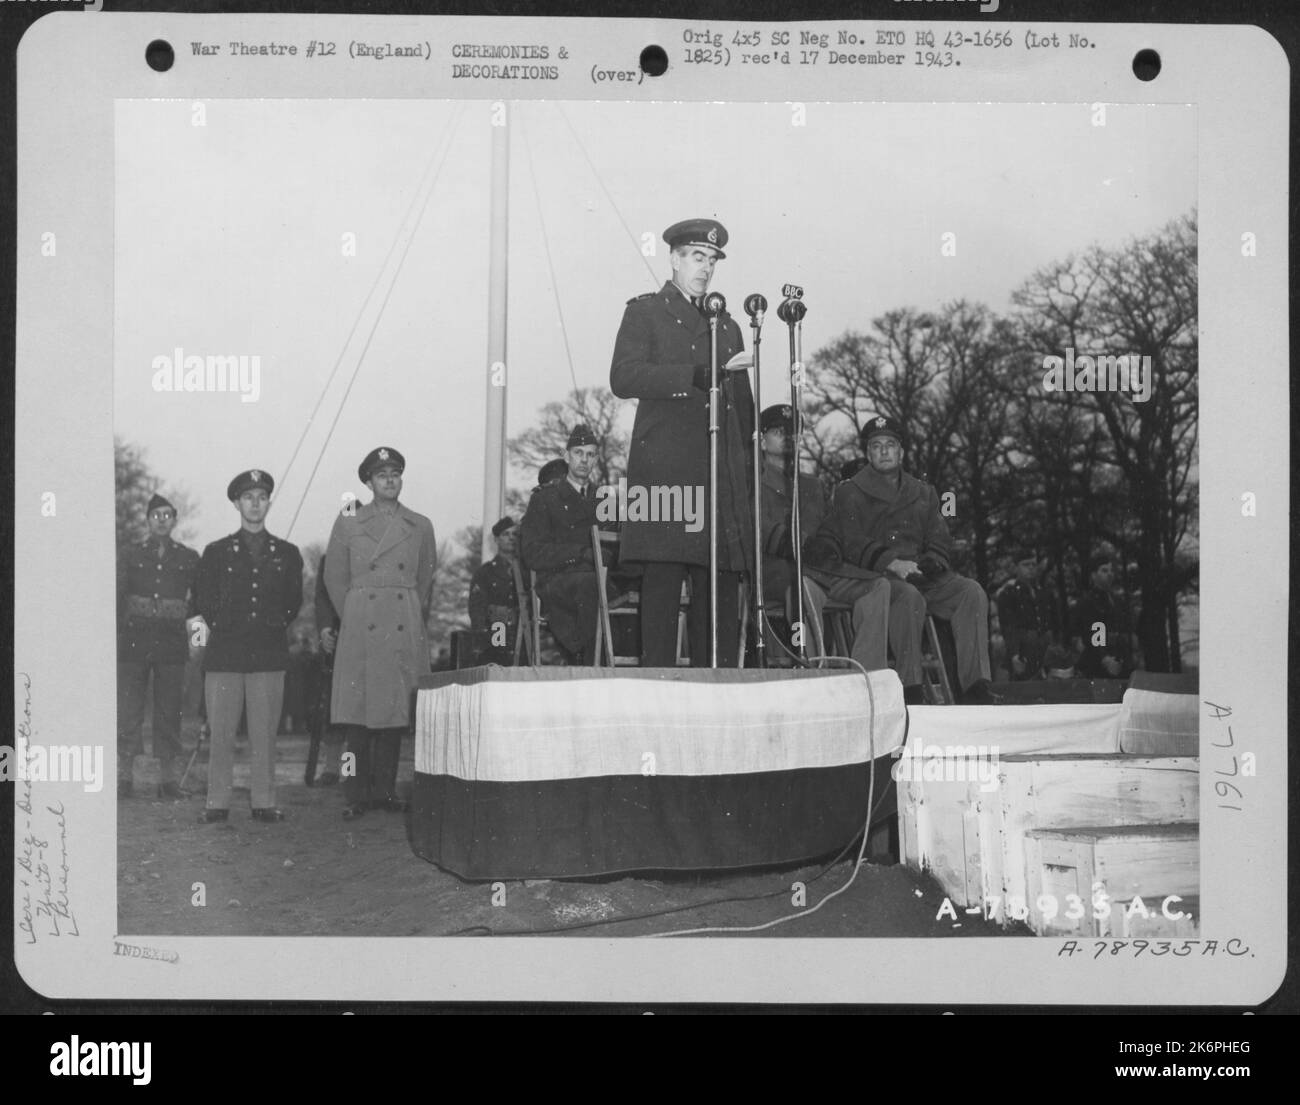 British Air Chief Marshall Sir Christpher Lloyd Courtney At A Ceremony Transferring A British Airfield To The 8Th U.S. Air Force Service Command At Bushney Park, Teddington, England. Left To Right, Seated, Are: Major General Ira C. Eaker, Cg Of The 8Th A Stock Photo